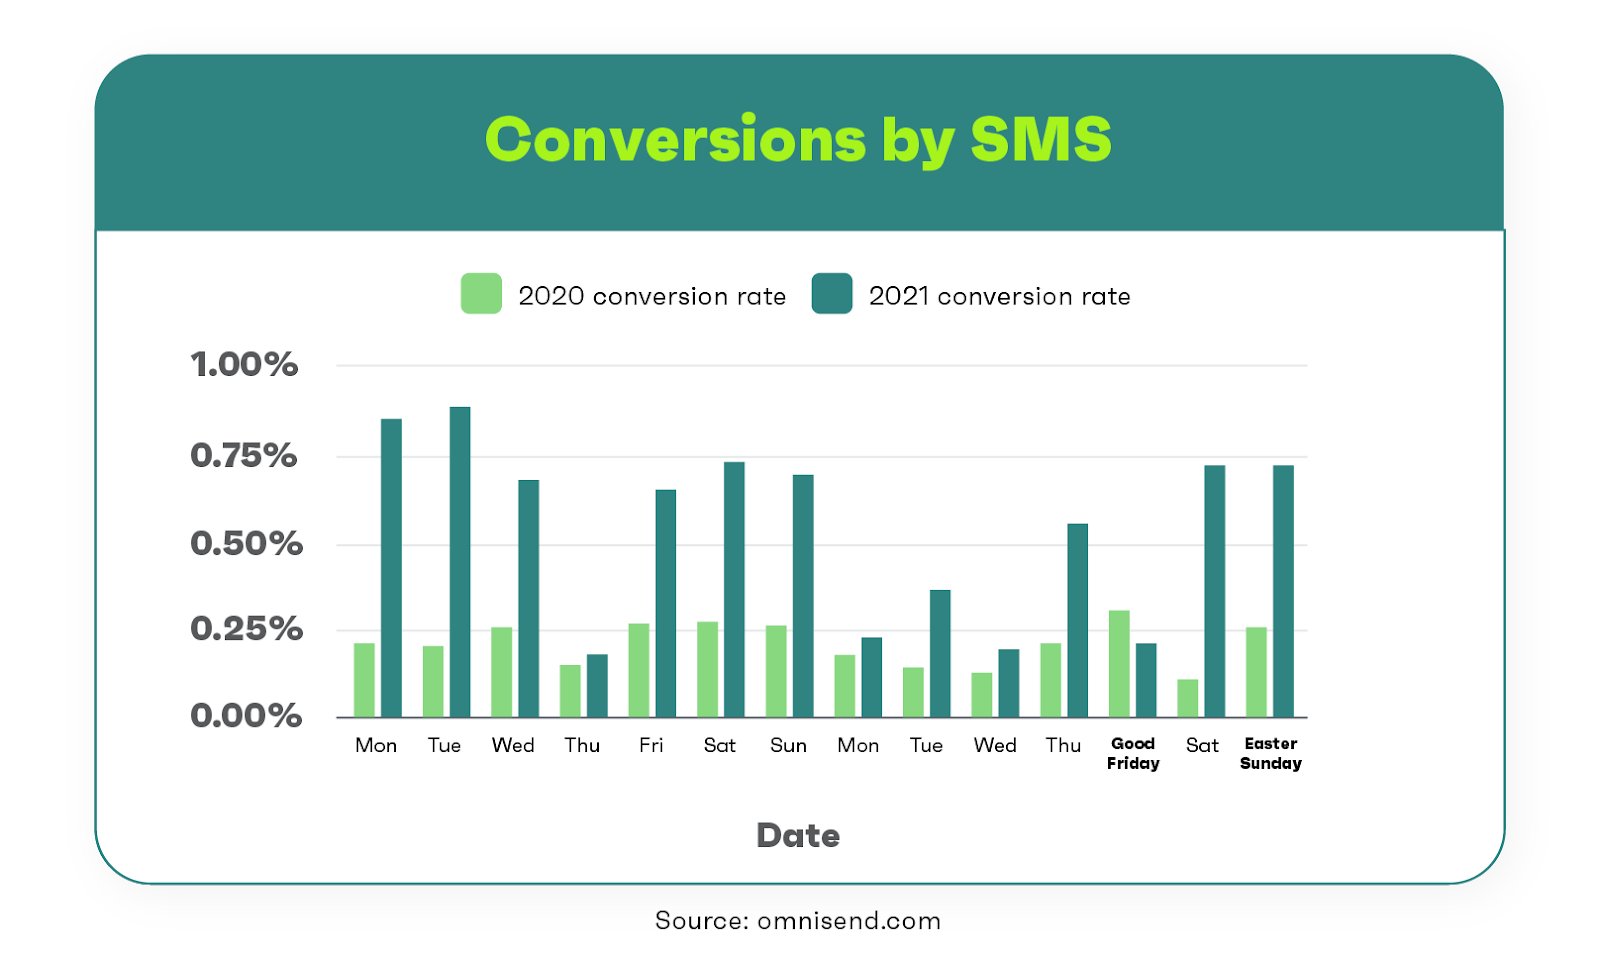 conversions by SMS during Easter period